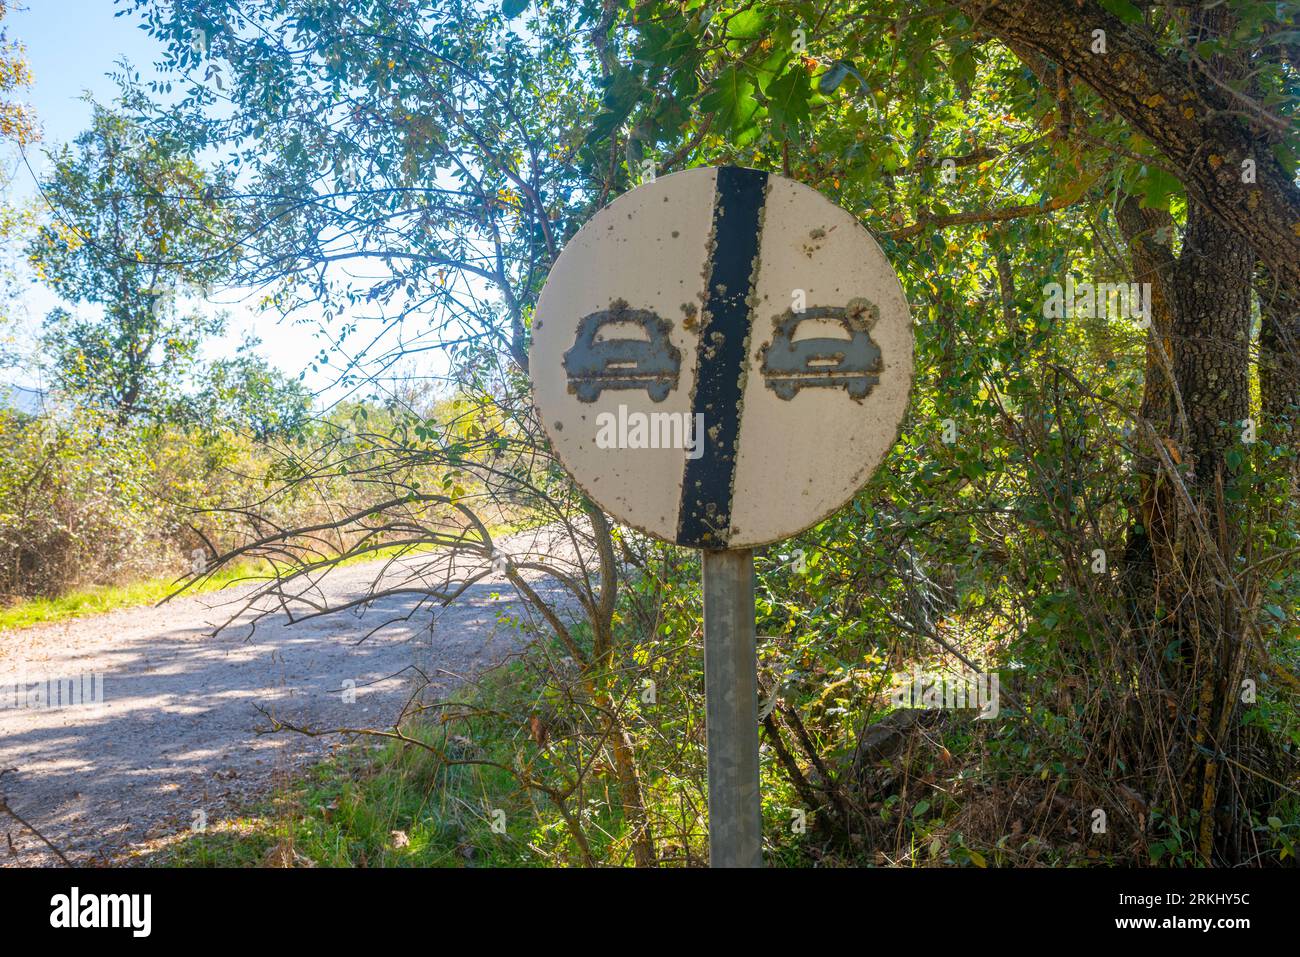 Old traffic signal: No overtaking. Piñuecar, Madrid province, Spain. Stock Photo